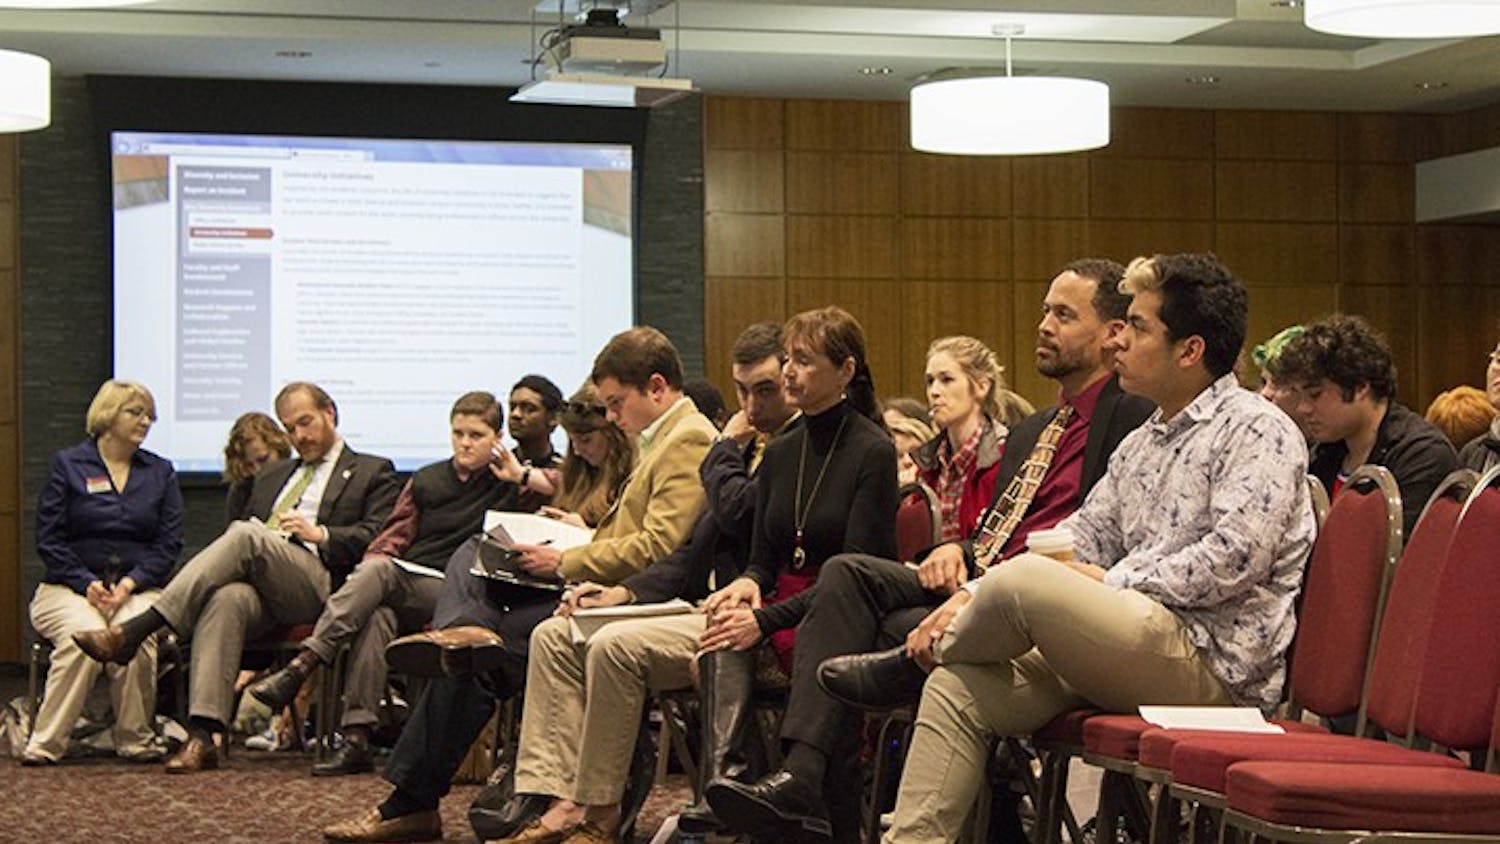 Students had the opportunity to voice their concerns about a variety of problems on campus.